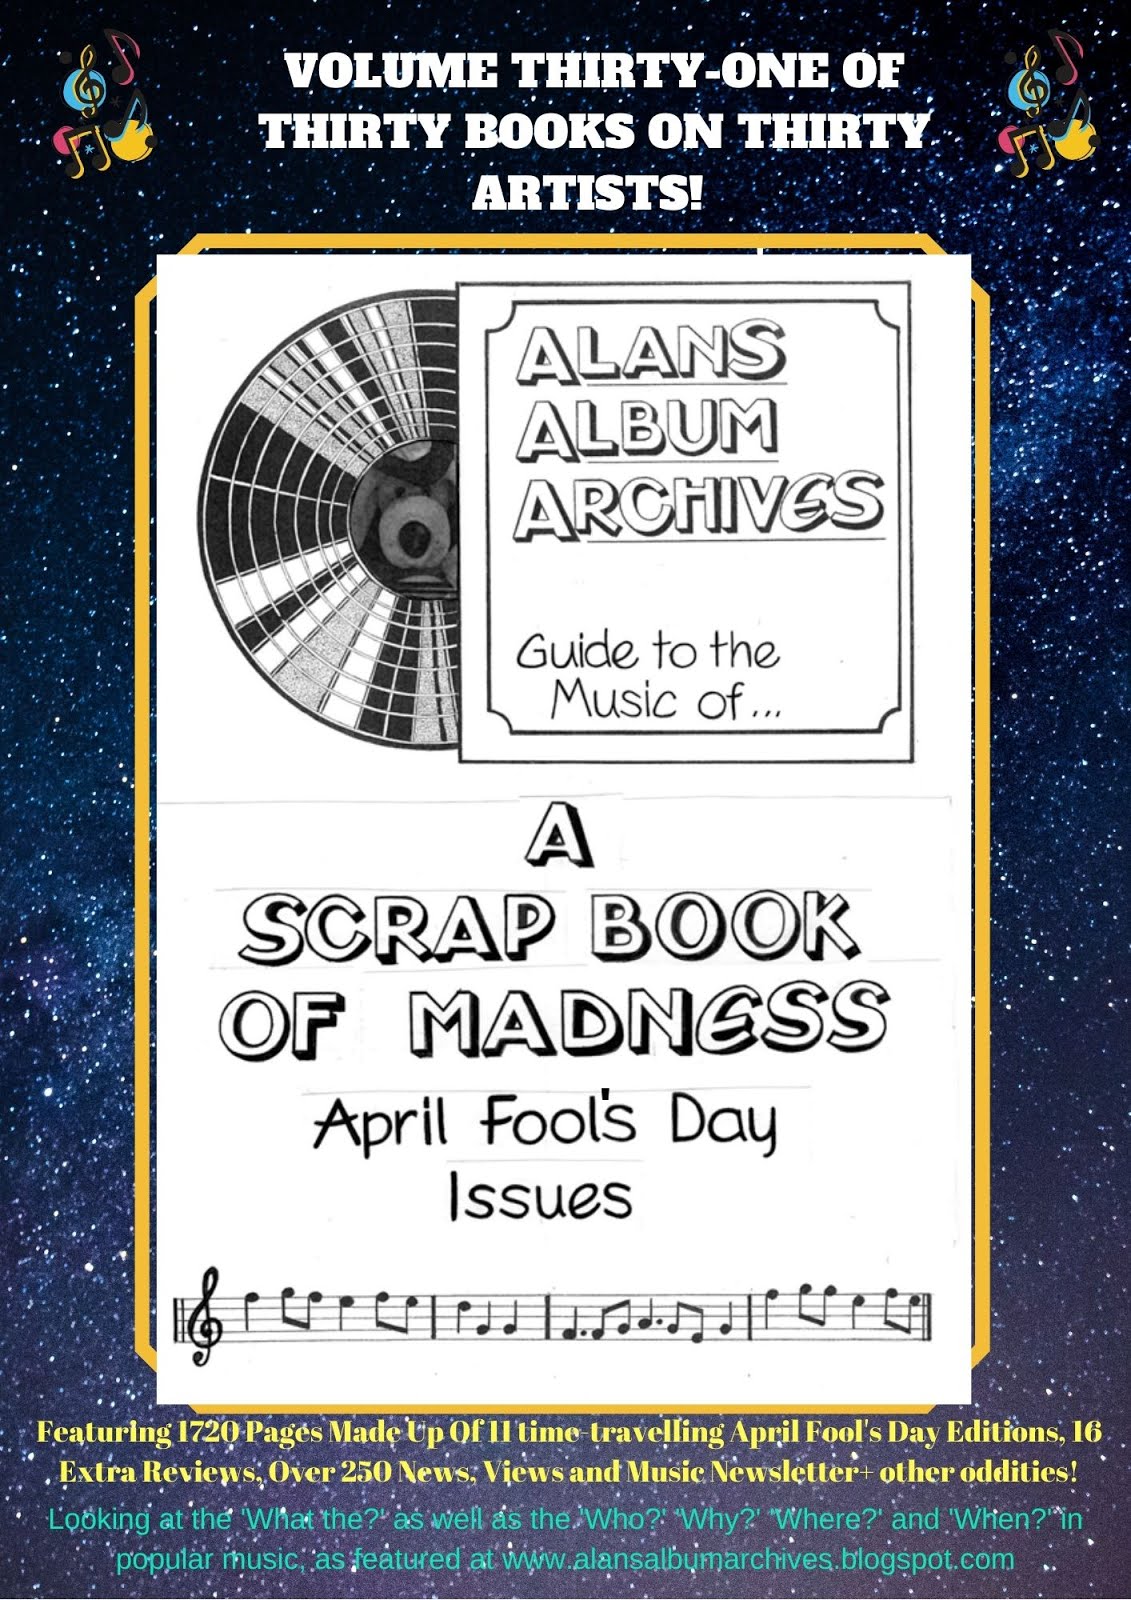 'A Scrapbook Of Madness - The Alan's Album Archives Guide To...Alan's Album Archives'